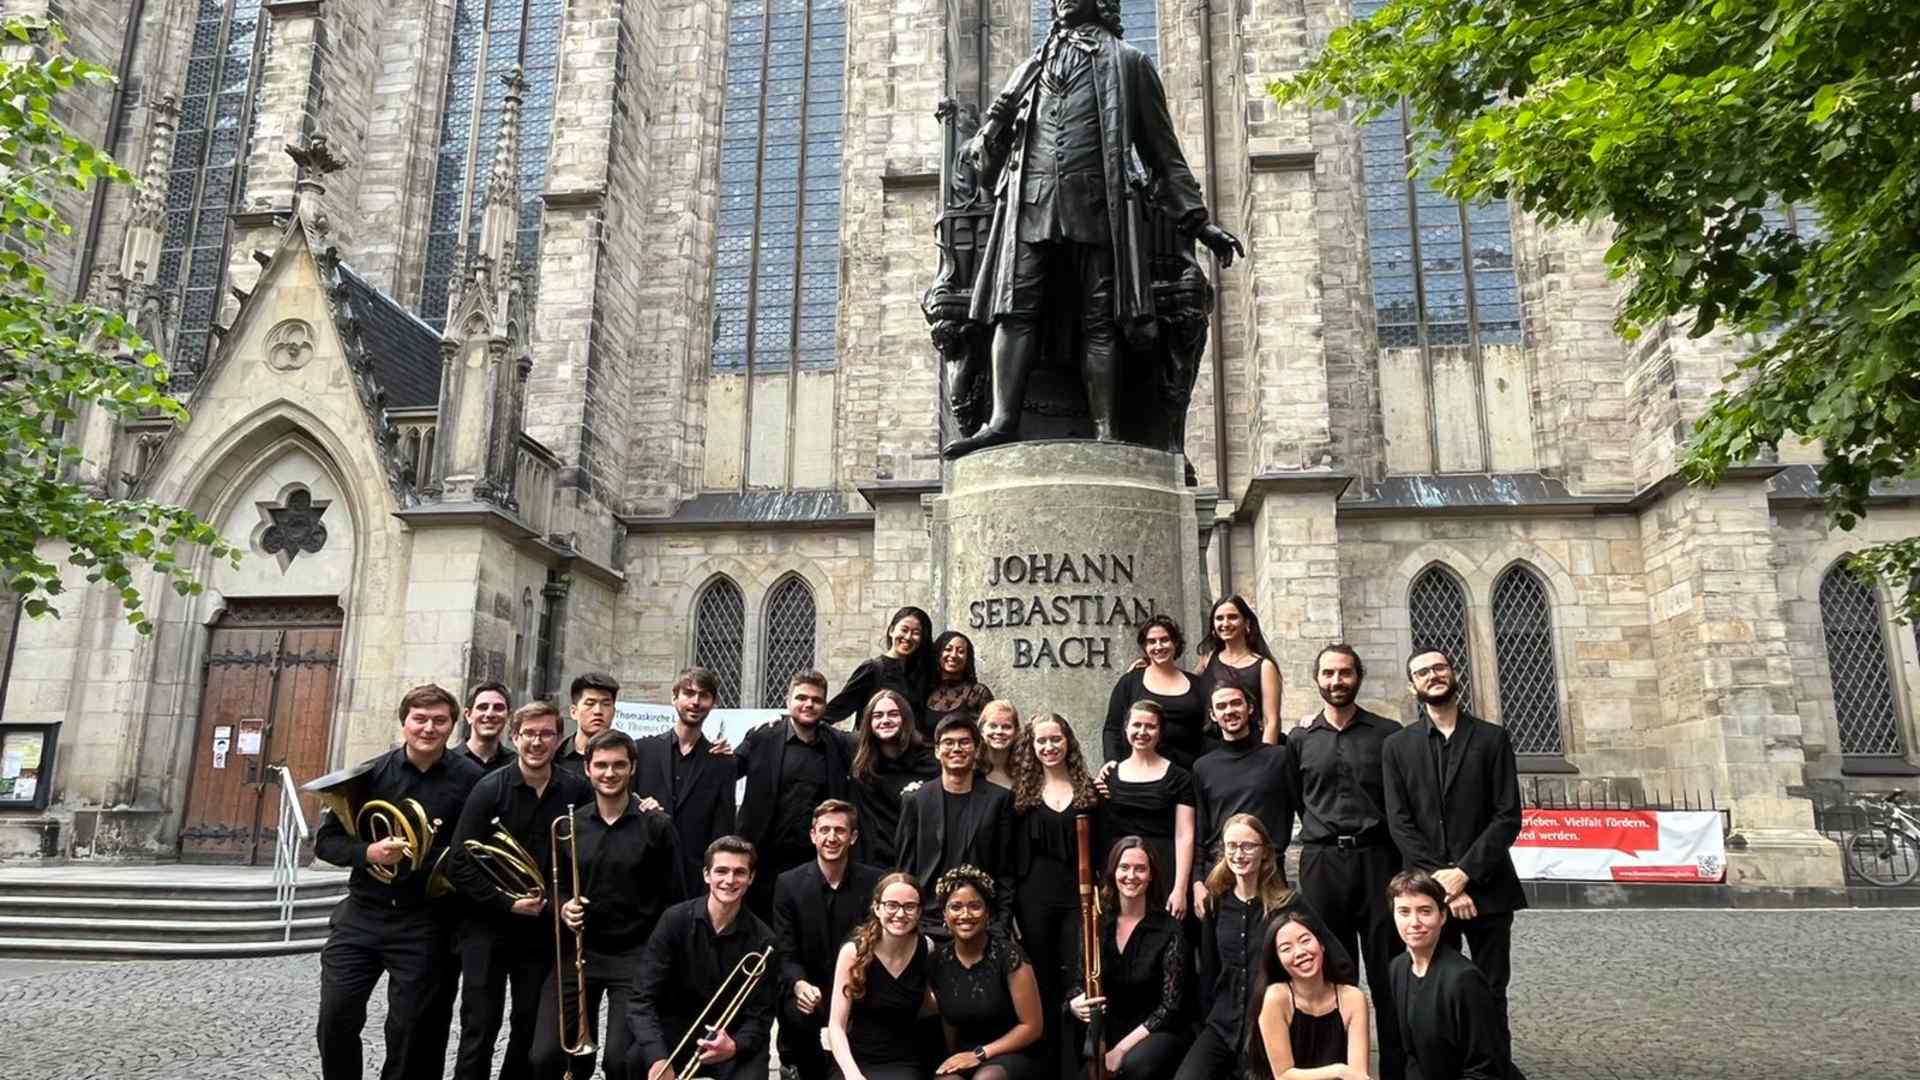 Students pose with a statue of J.S. Bach